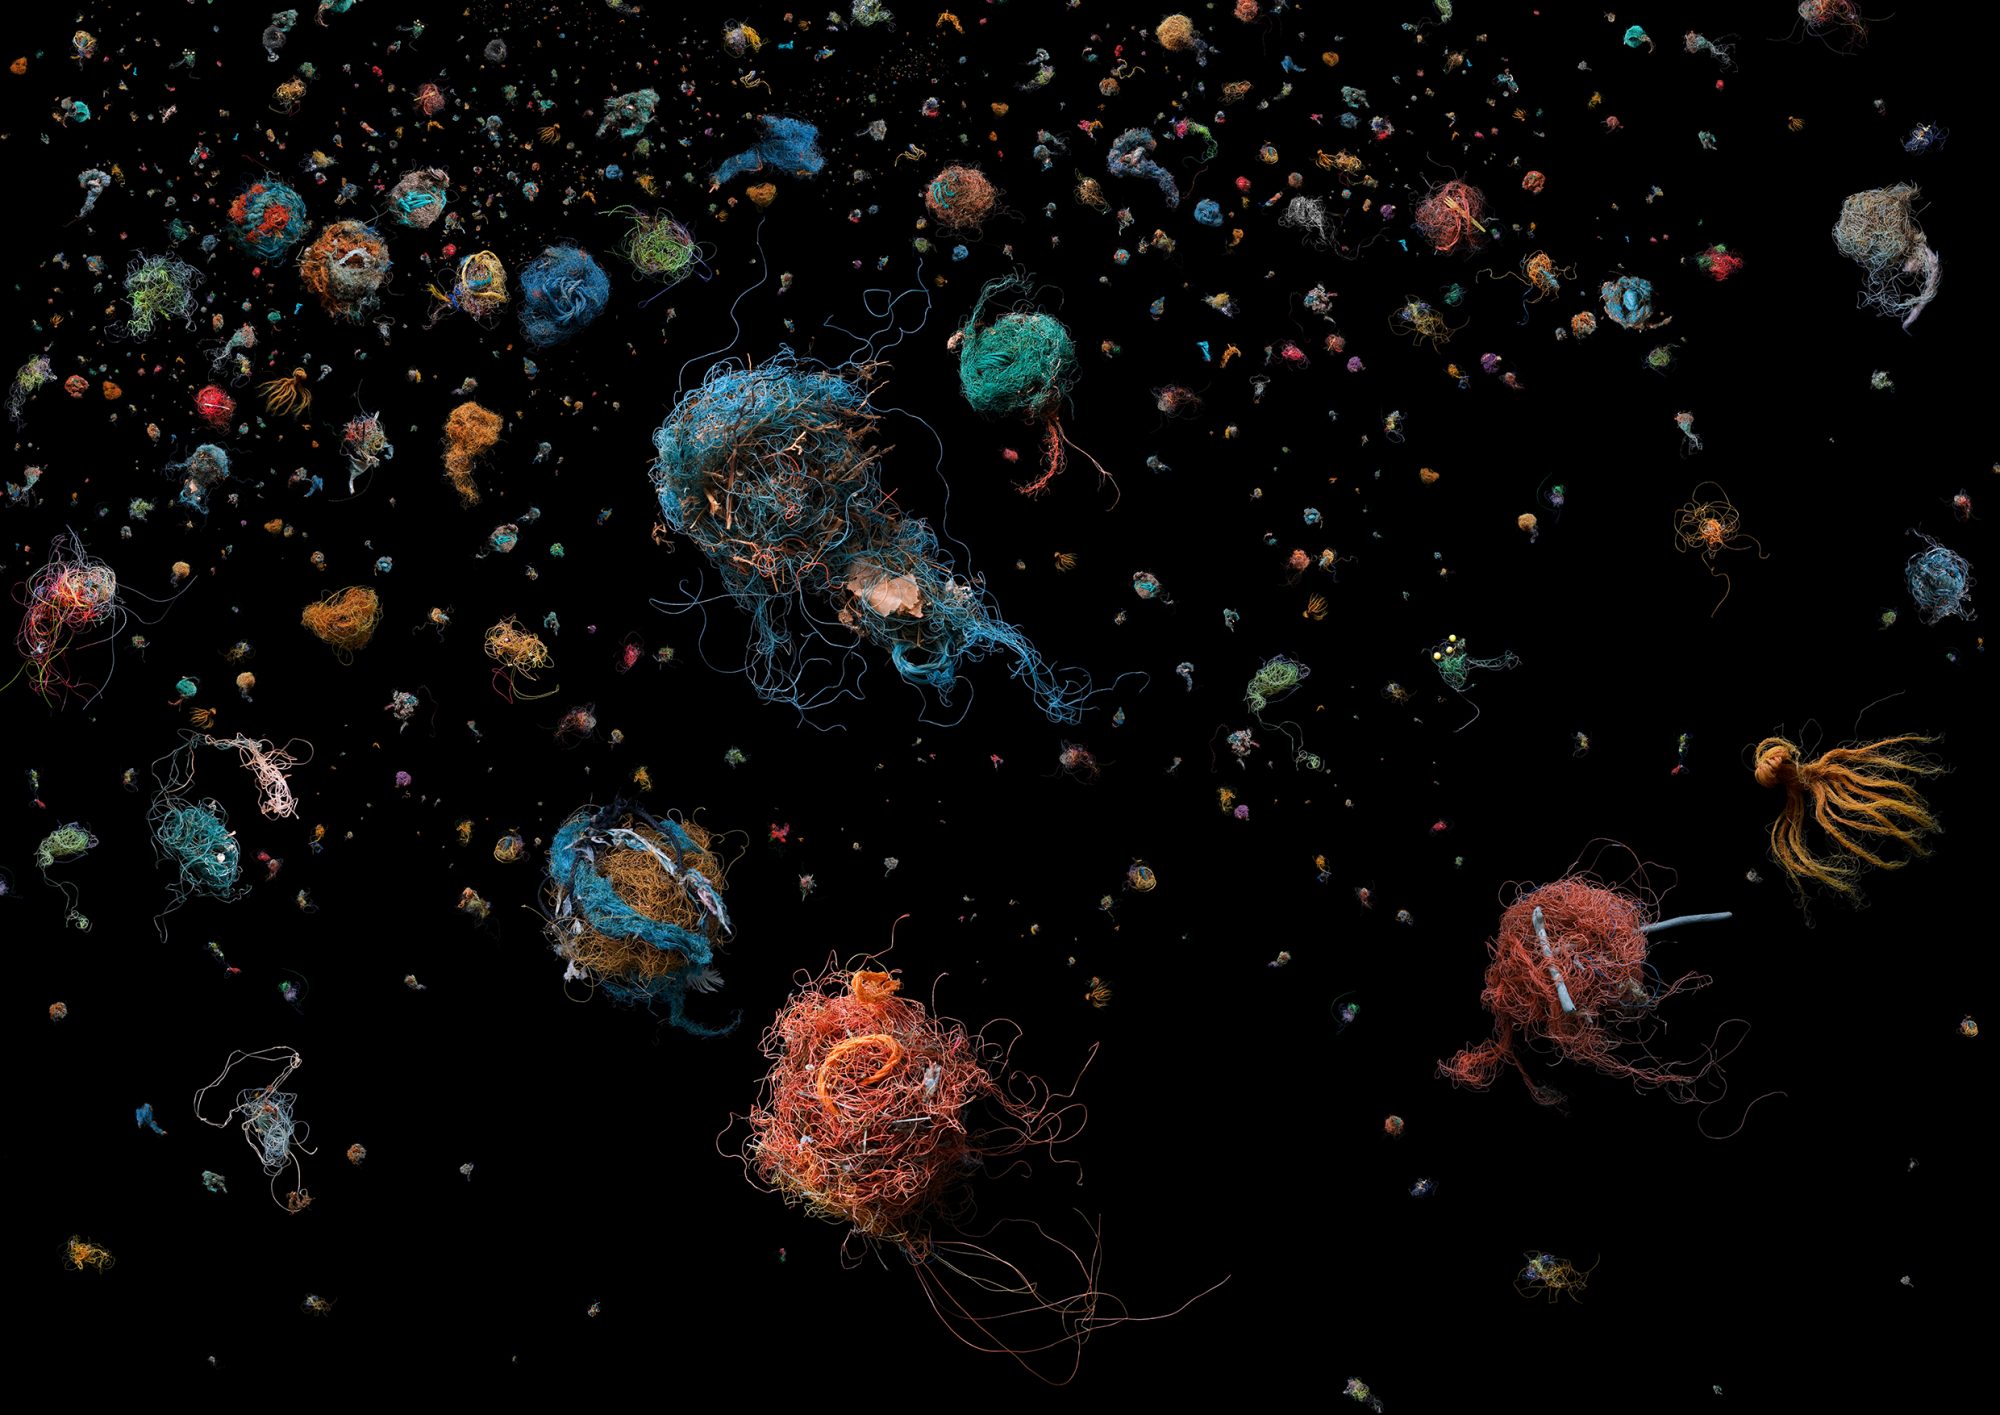 Online Exhibition: Our Plastic Ocean by Mandy Barker at Brighton Museum and Art Gallery — Impressions Gallery